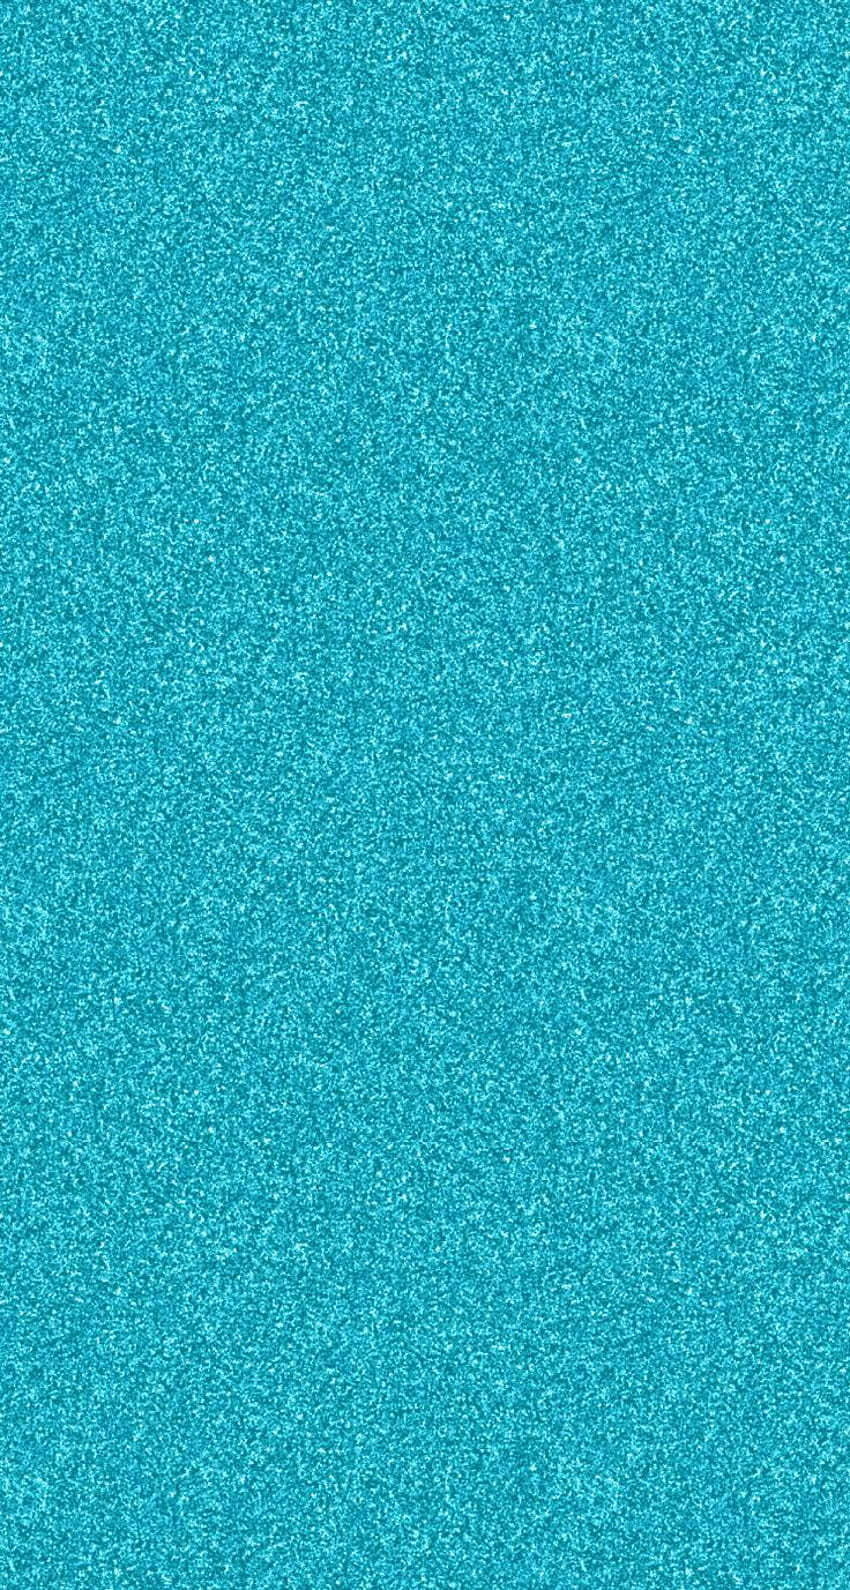 3 Turquoise, bright turquoise HD phone wallpaper